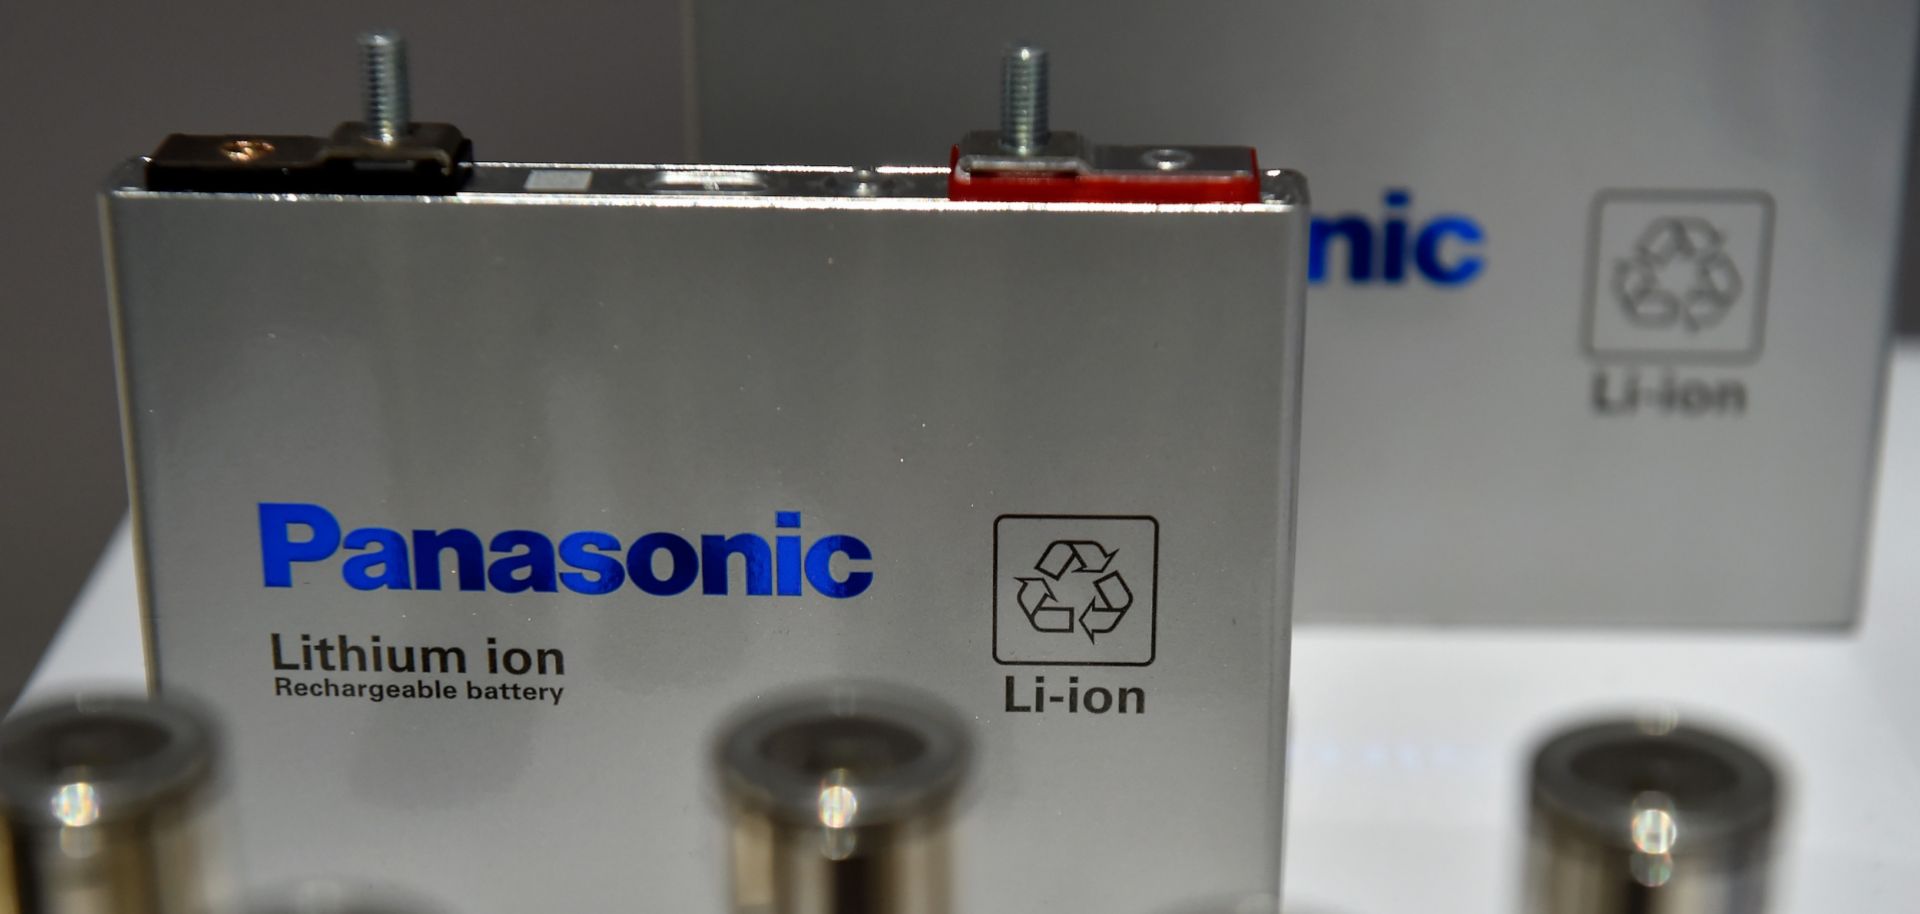 A lithium ion battery is on display at a technology trade show in the united states. 